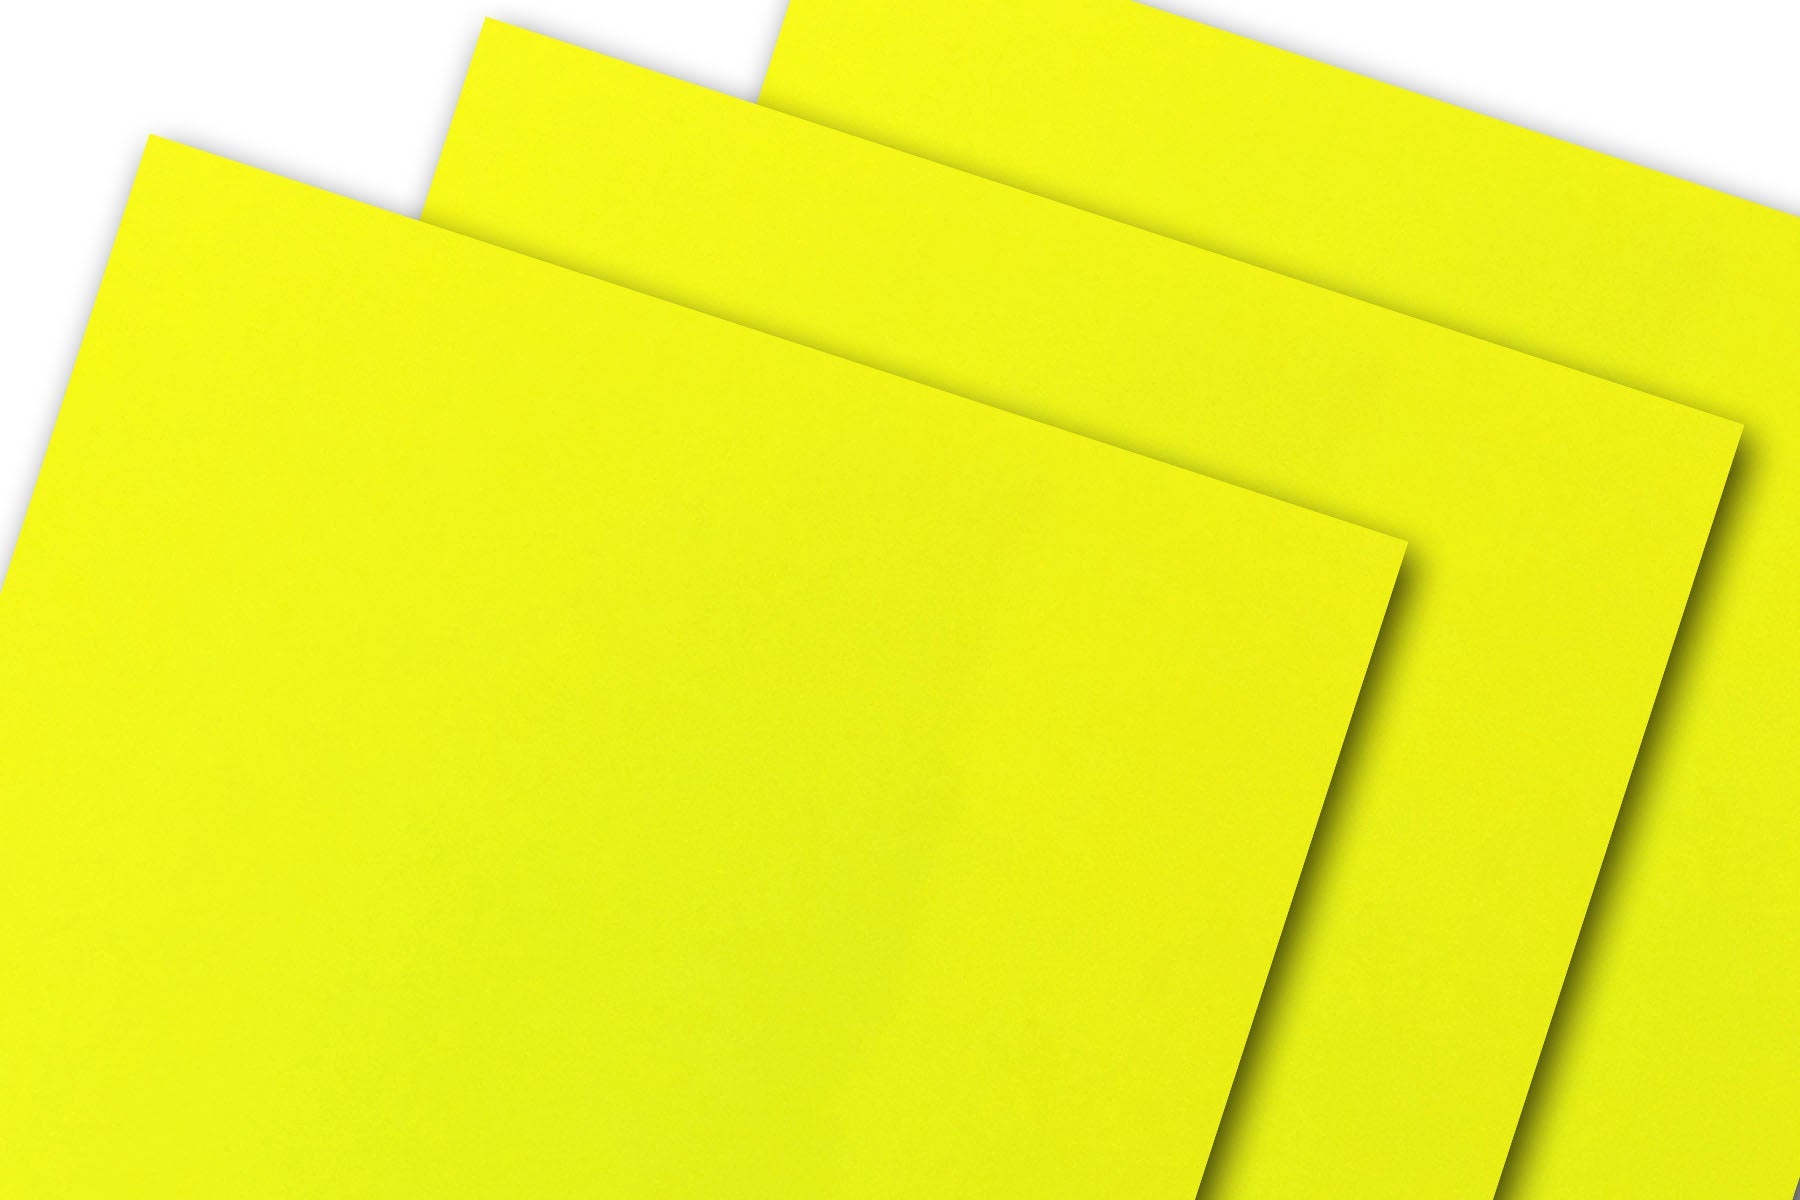 Vibrant Astrobright A2 Envelopes for note cards and announcements -  CutCardStock